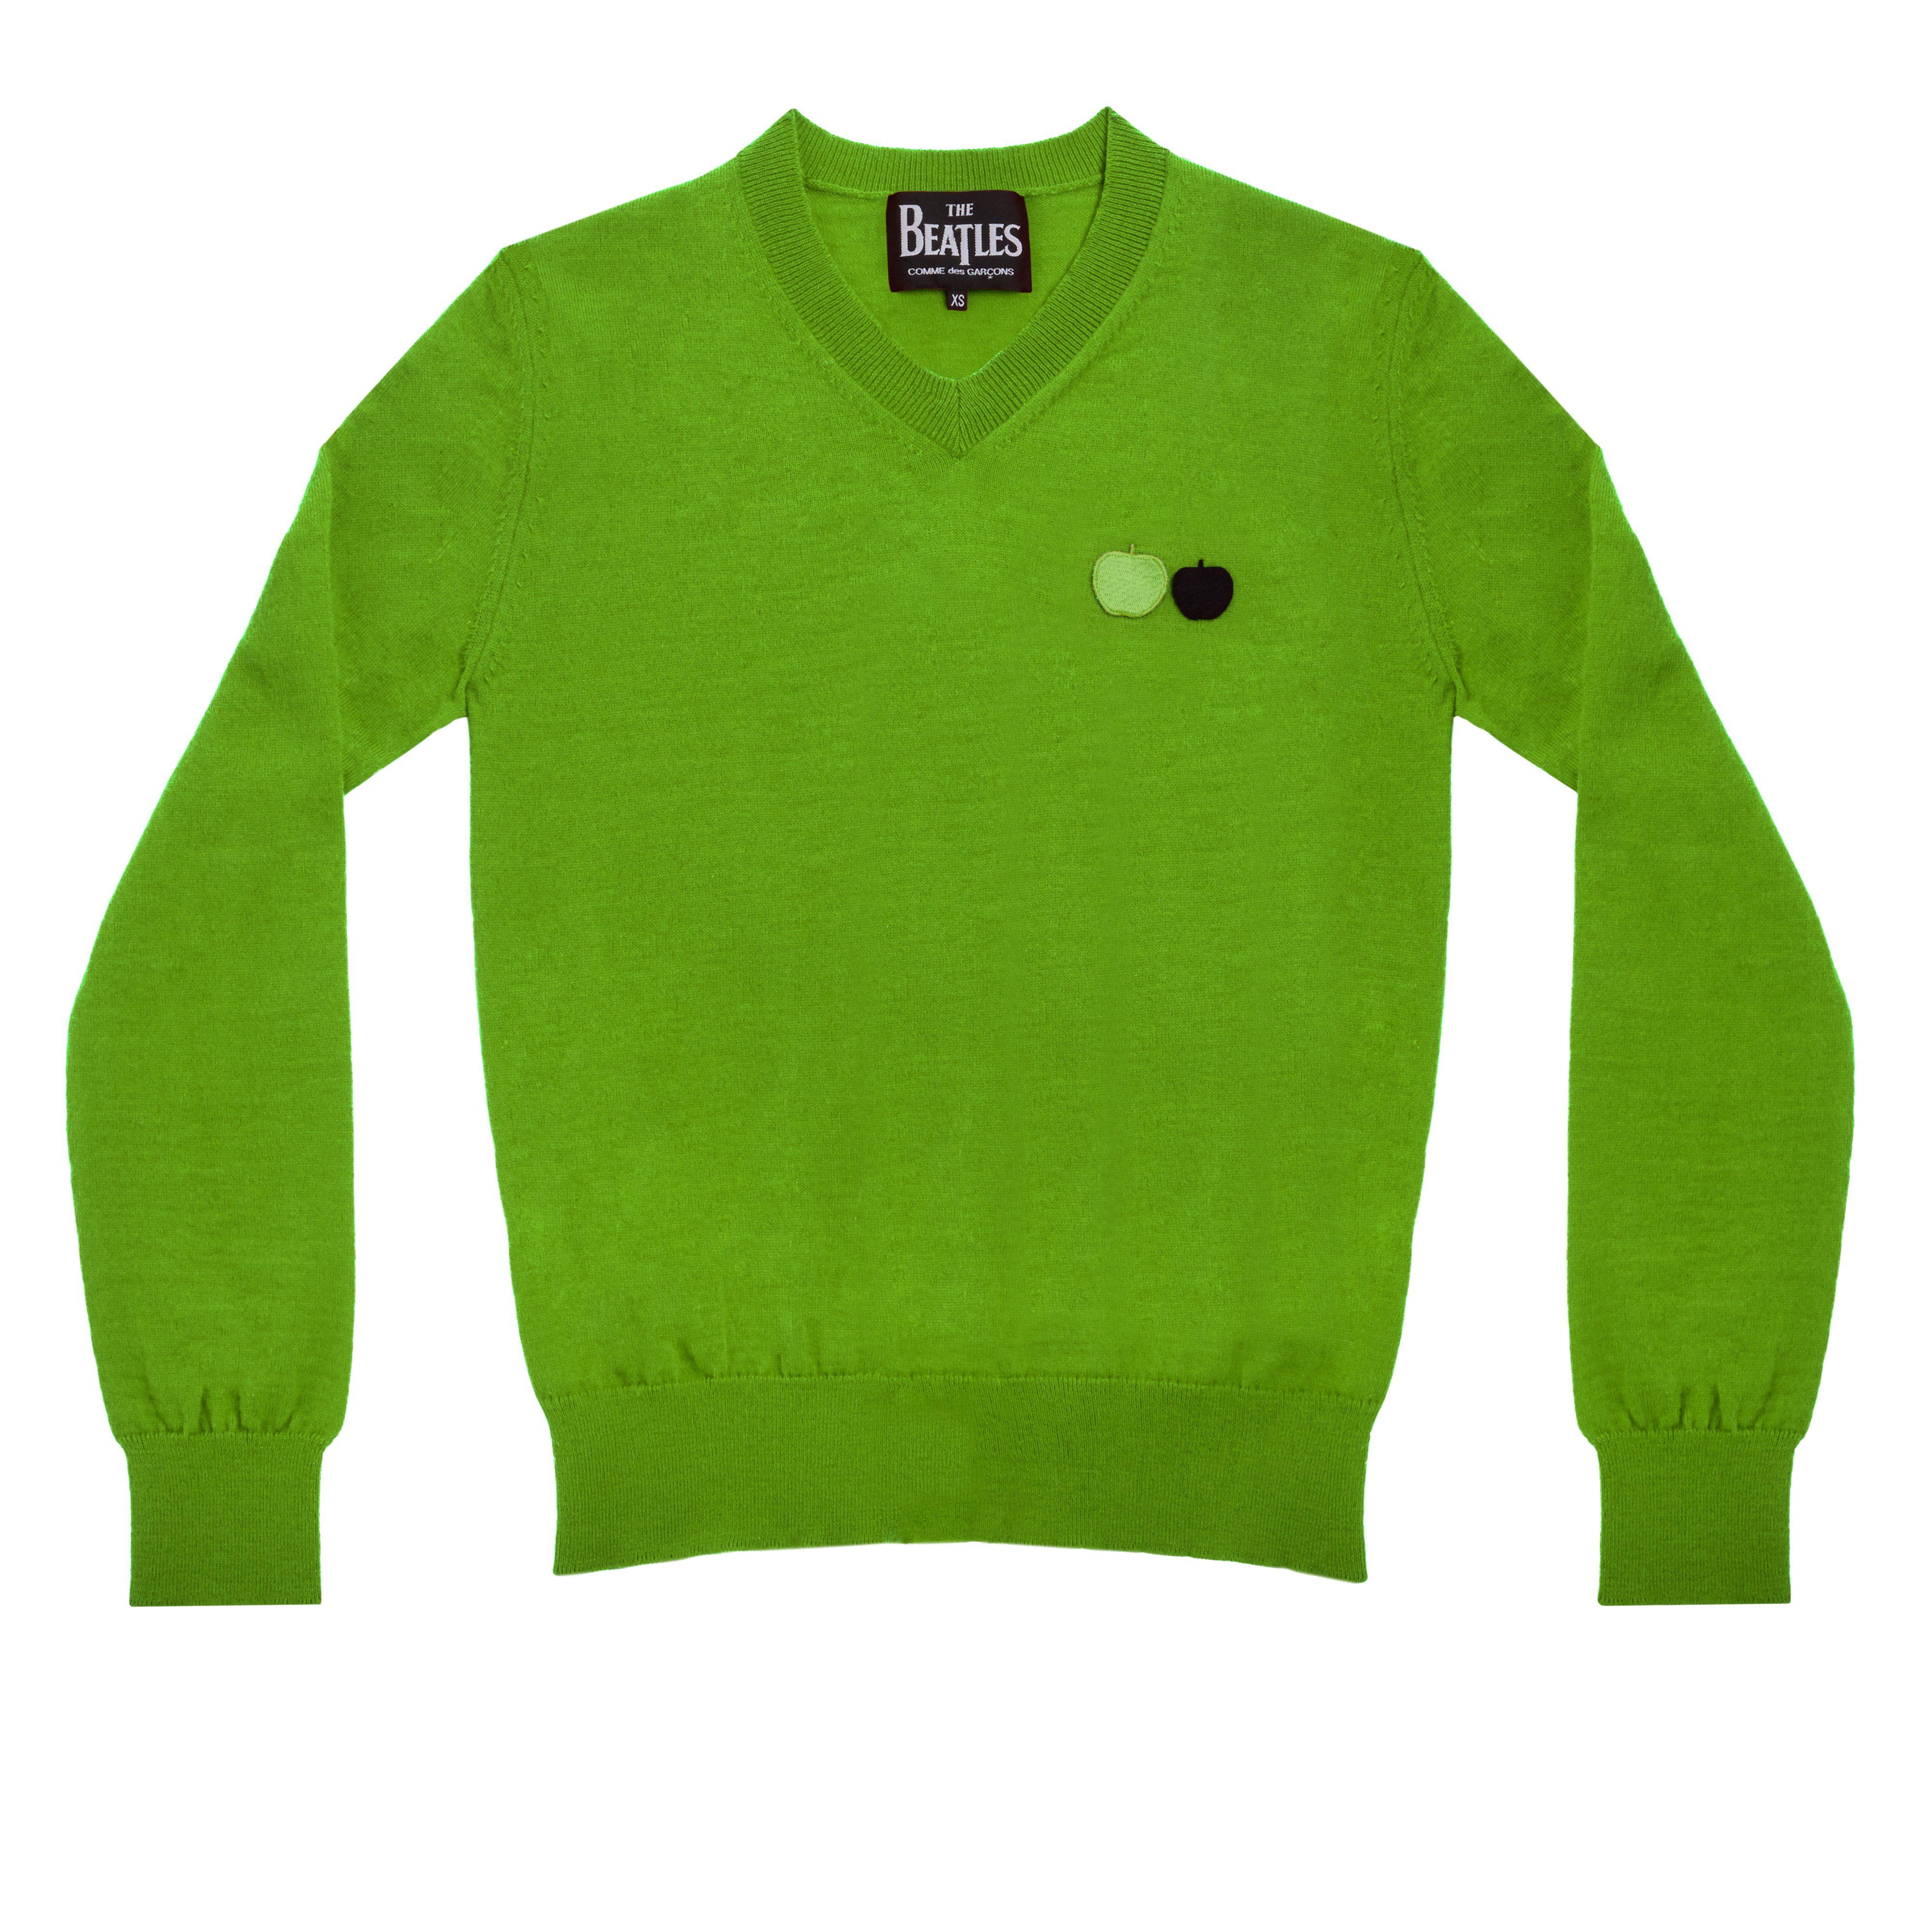 CDG x The Beatles Unisex Pullover (Green) by COMME DES GARCONS X BEATLES